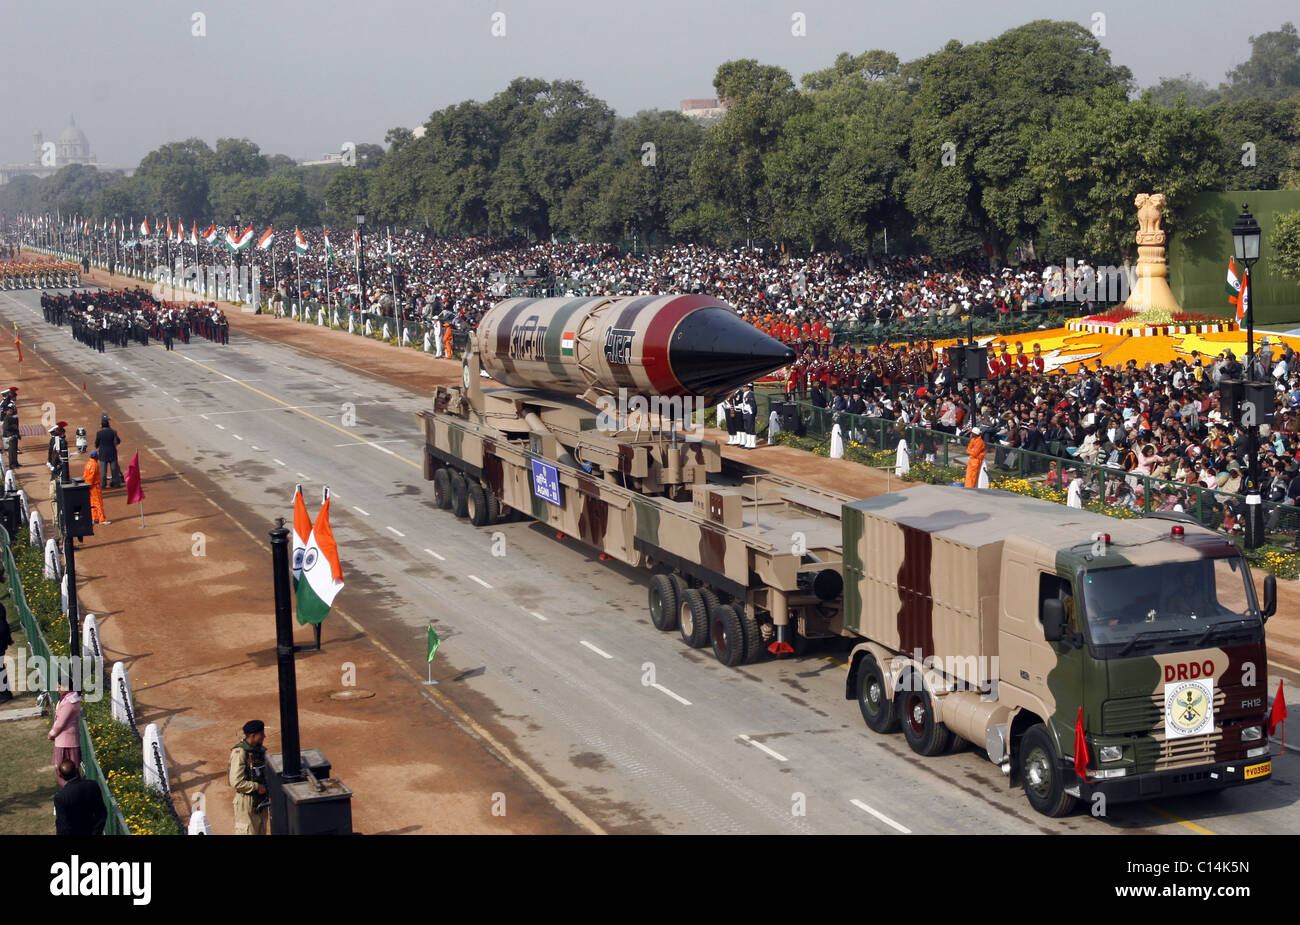 indian-army-with-agni-iii-missile-during-the-indian-republic-day-parade-C14K5N.jpg